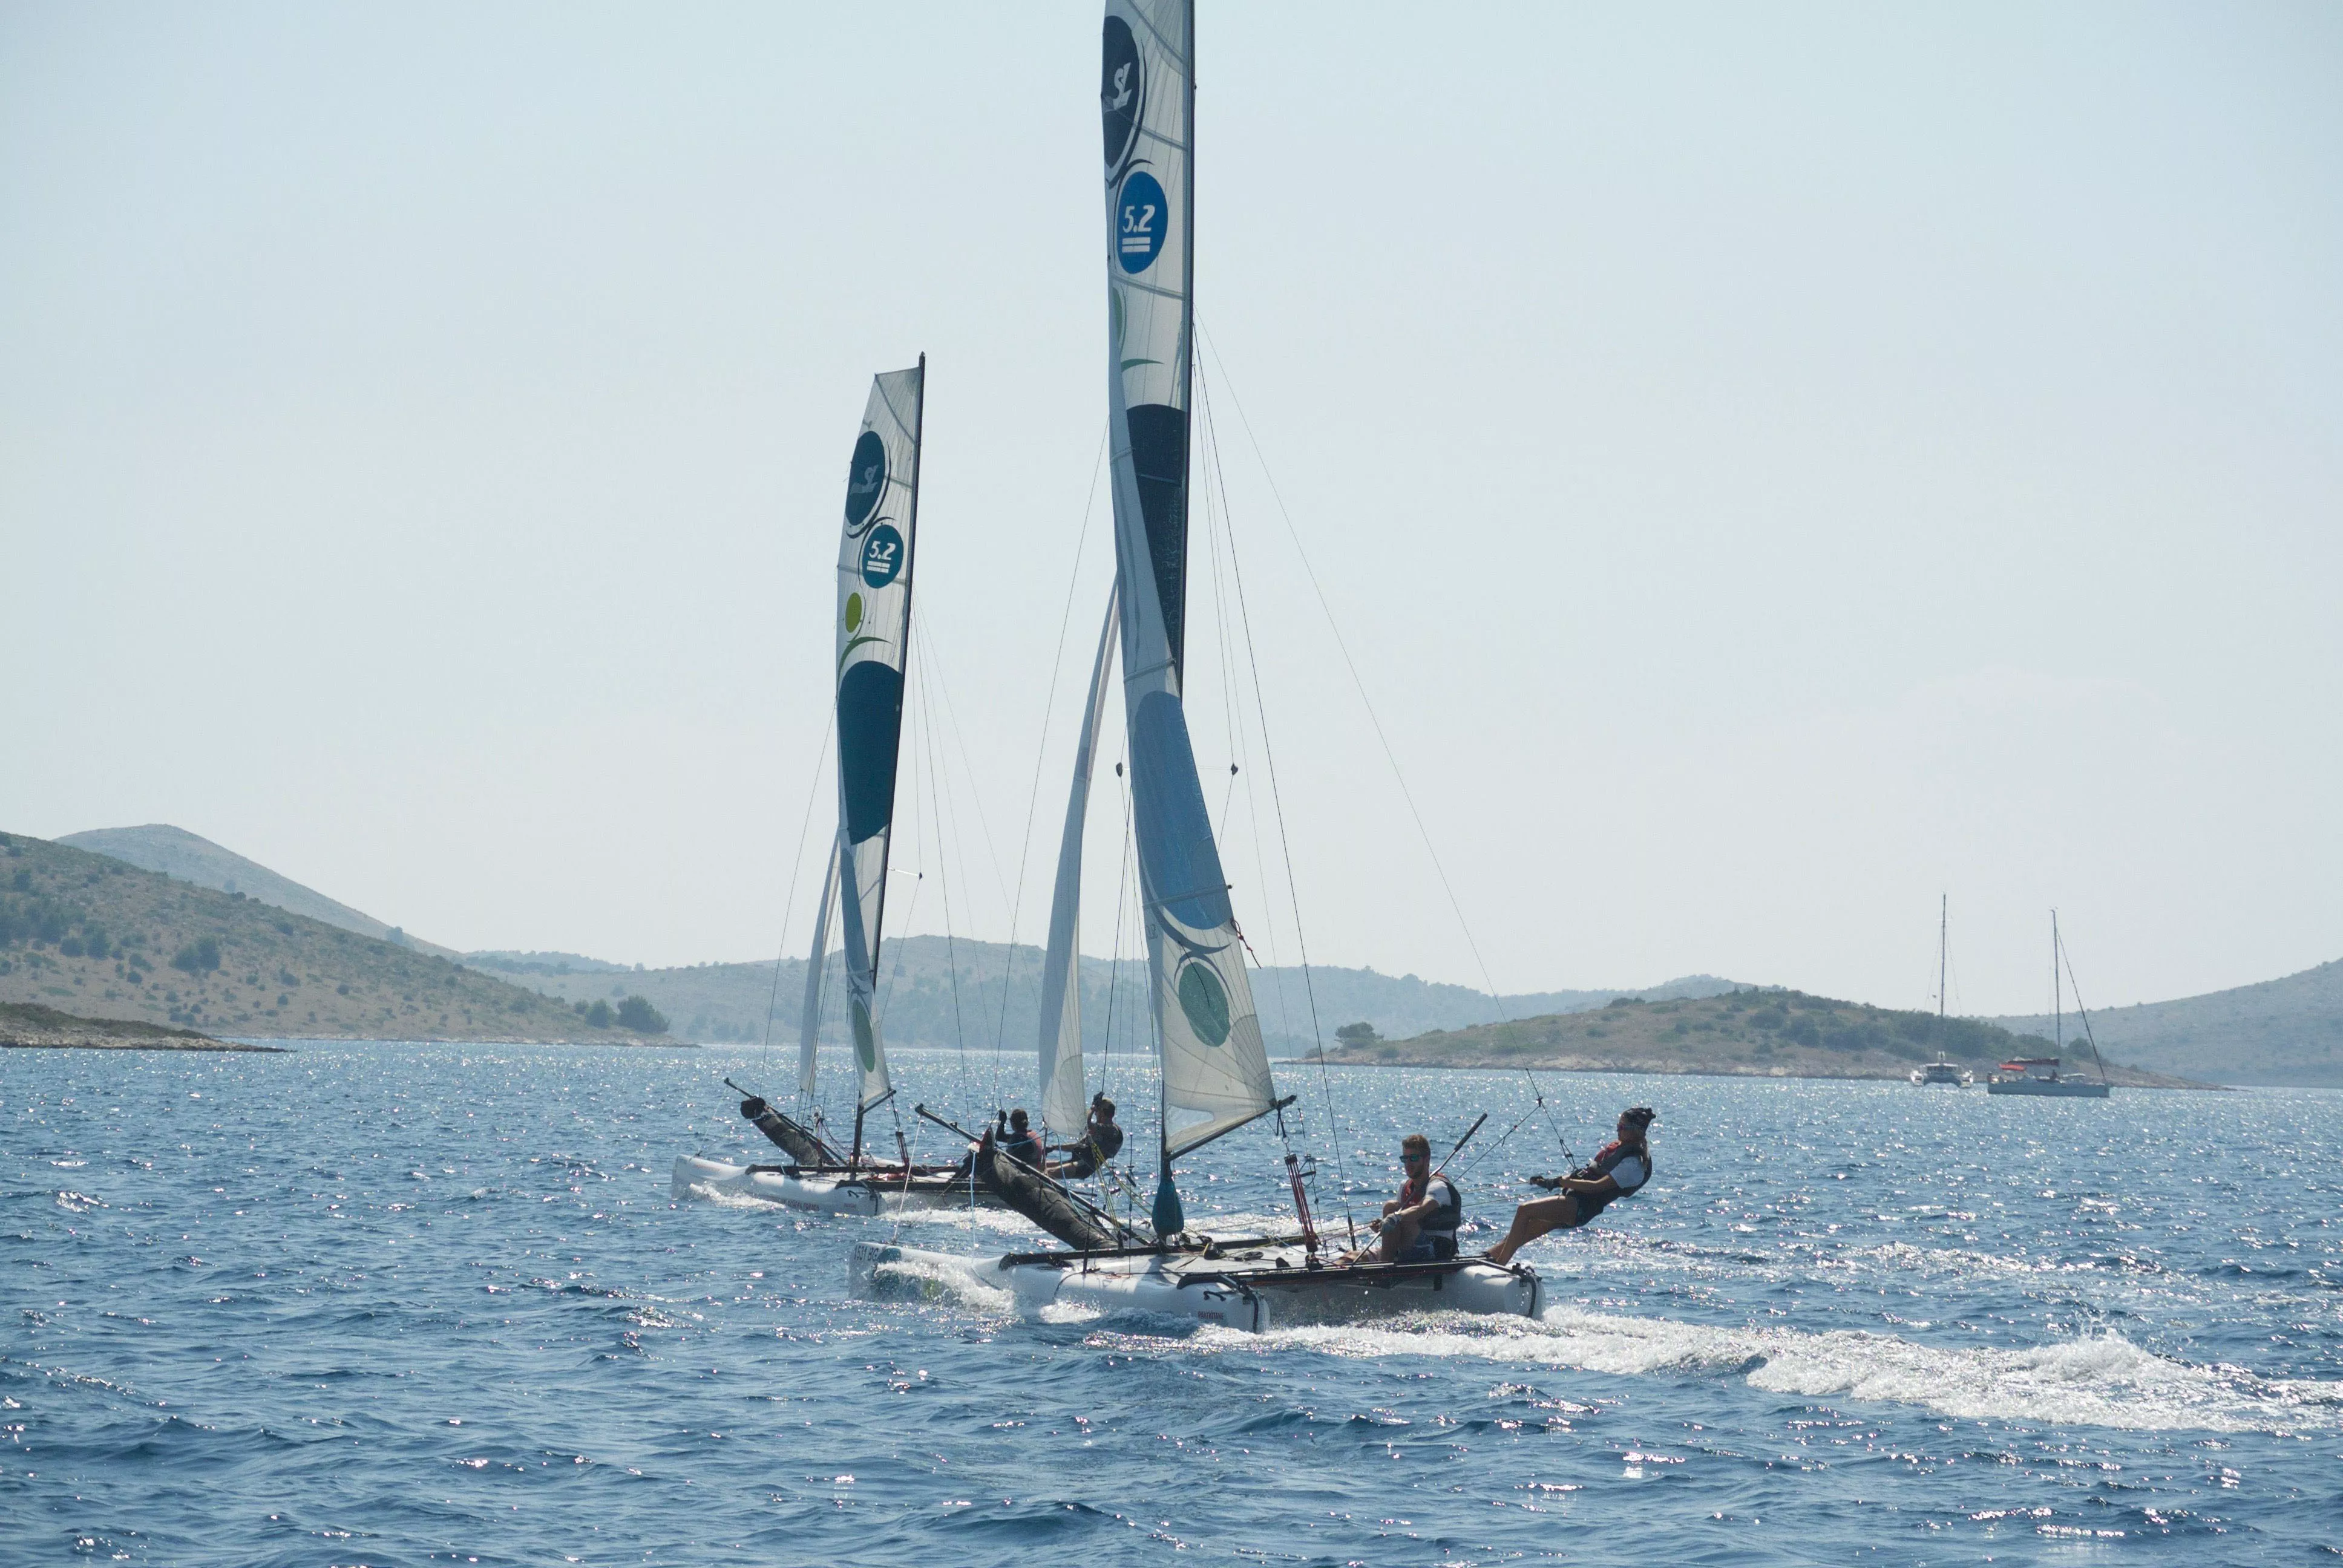 Sailing School Dao Yachting in Turkey, Central Asia | Yachting - Rated 0.9